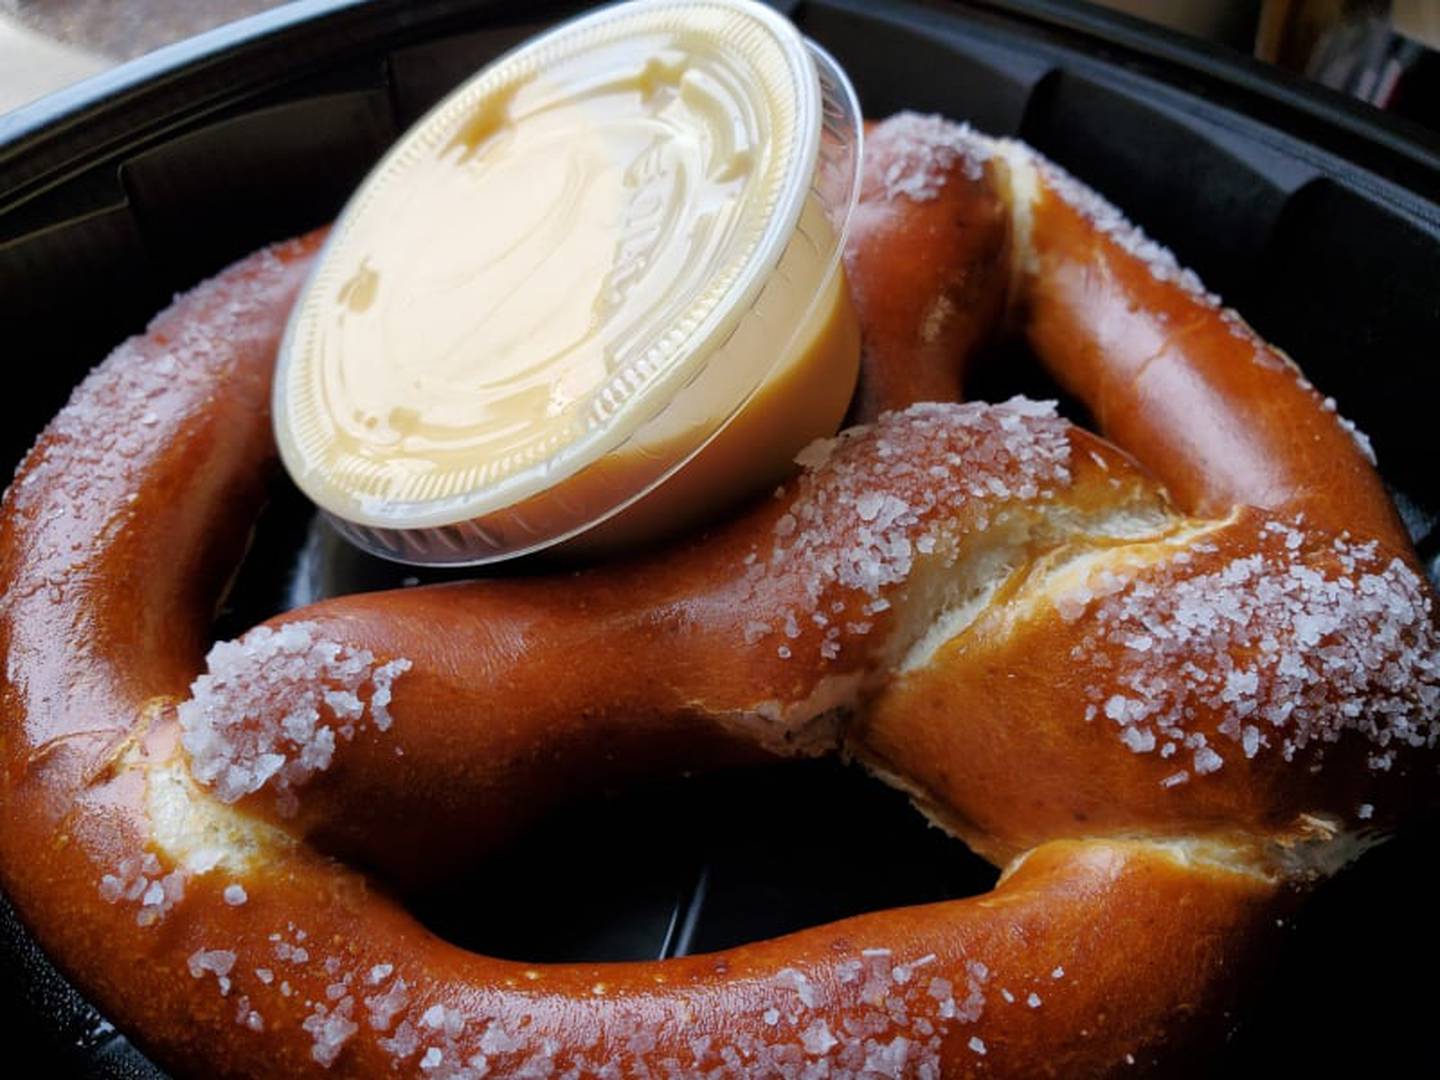 The hot, soft pretzel from Jameson's Pub in Joliet was everything one could want in a hot soft pretzel. It was hot, soft, and large enough to share four ways.